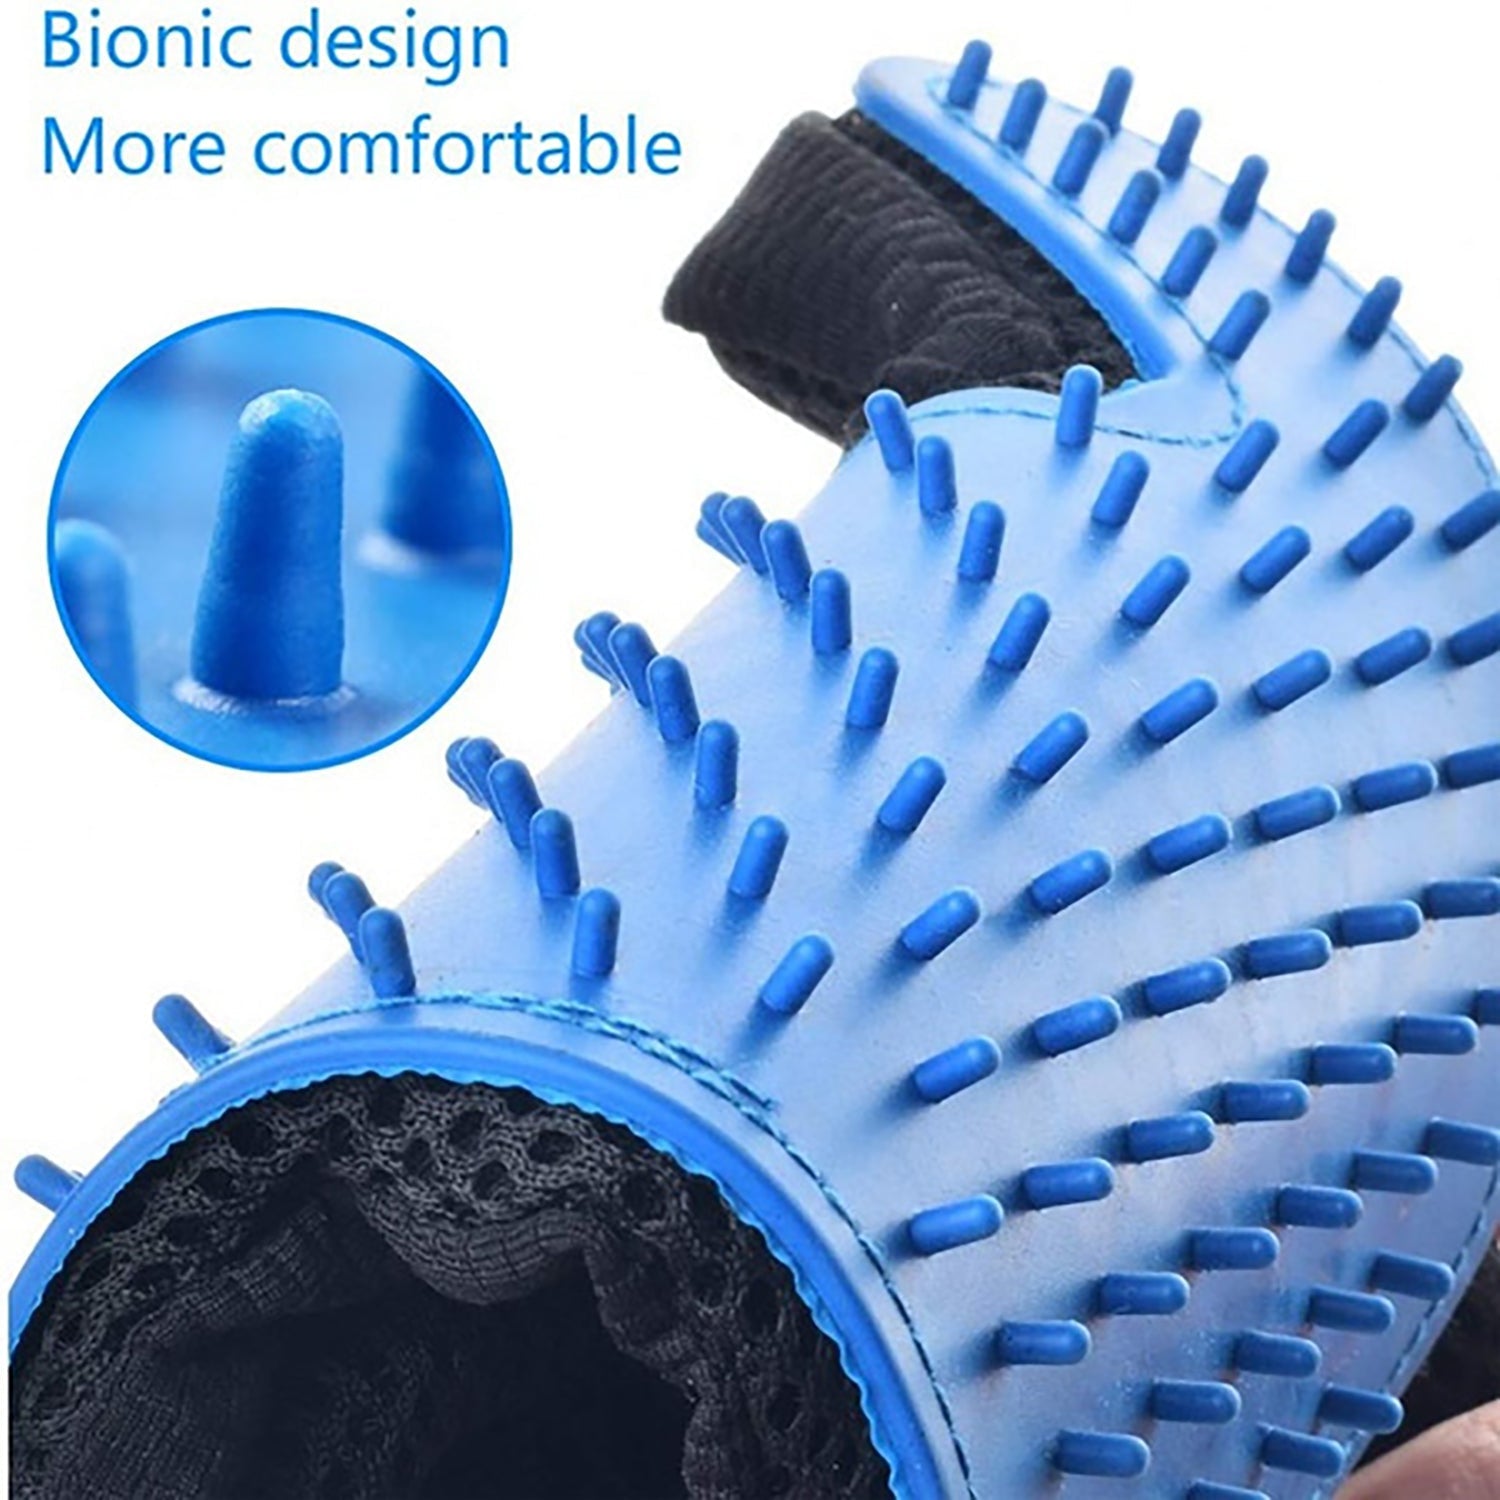 4681 Pet Hair Remover Glove & Self Cleaning Fur Remover 